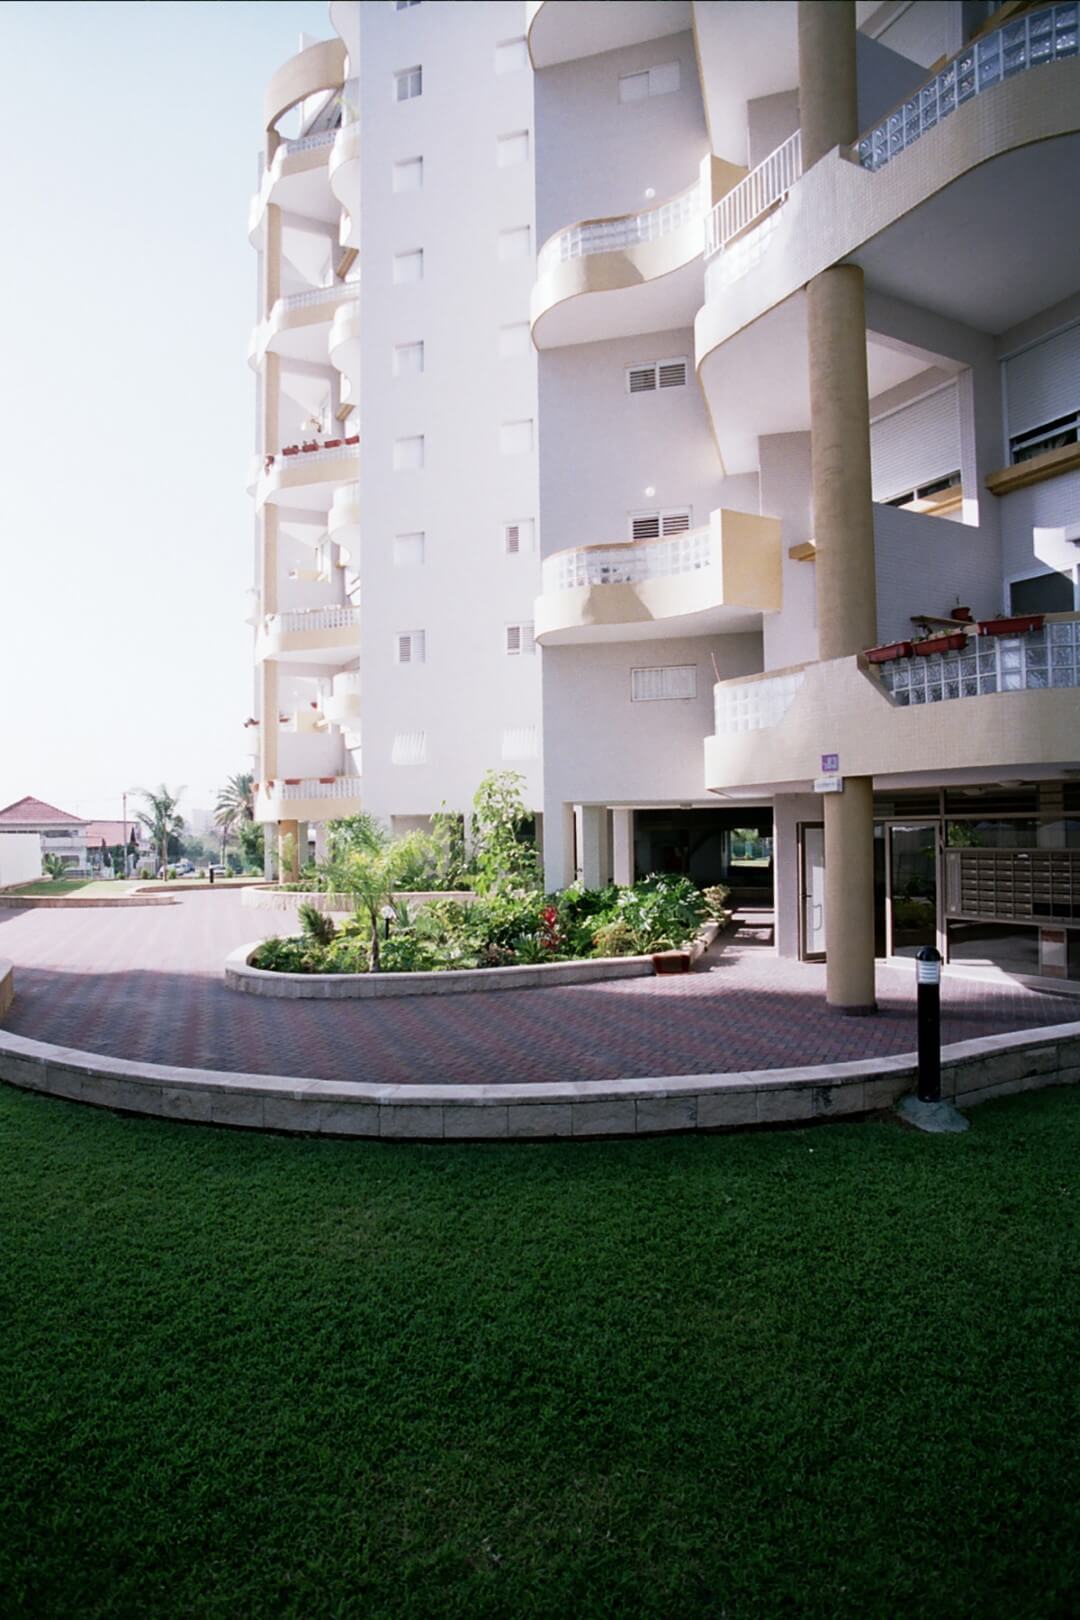 Photograph of the front entrance to the building in the Sycamore Park project in Rishon Lezion